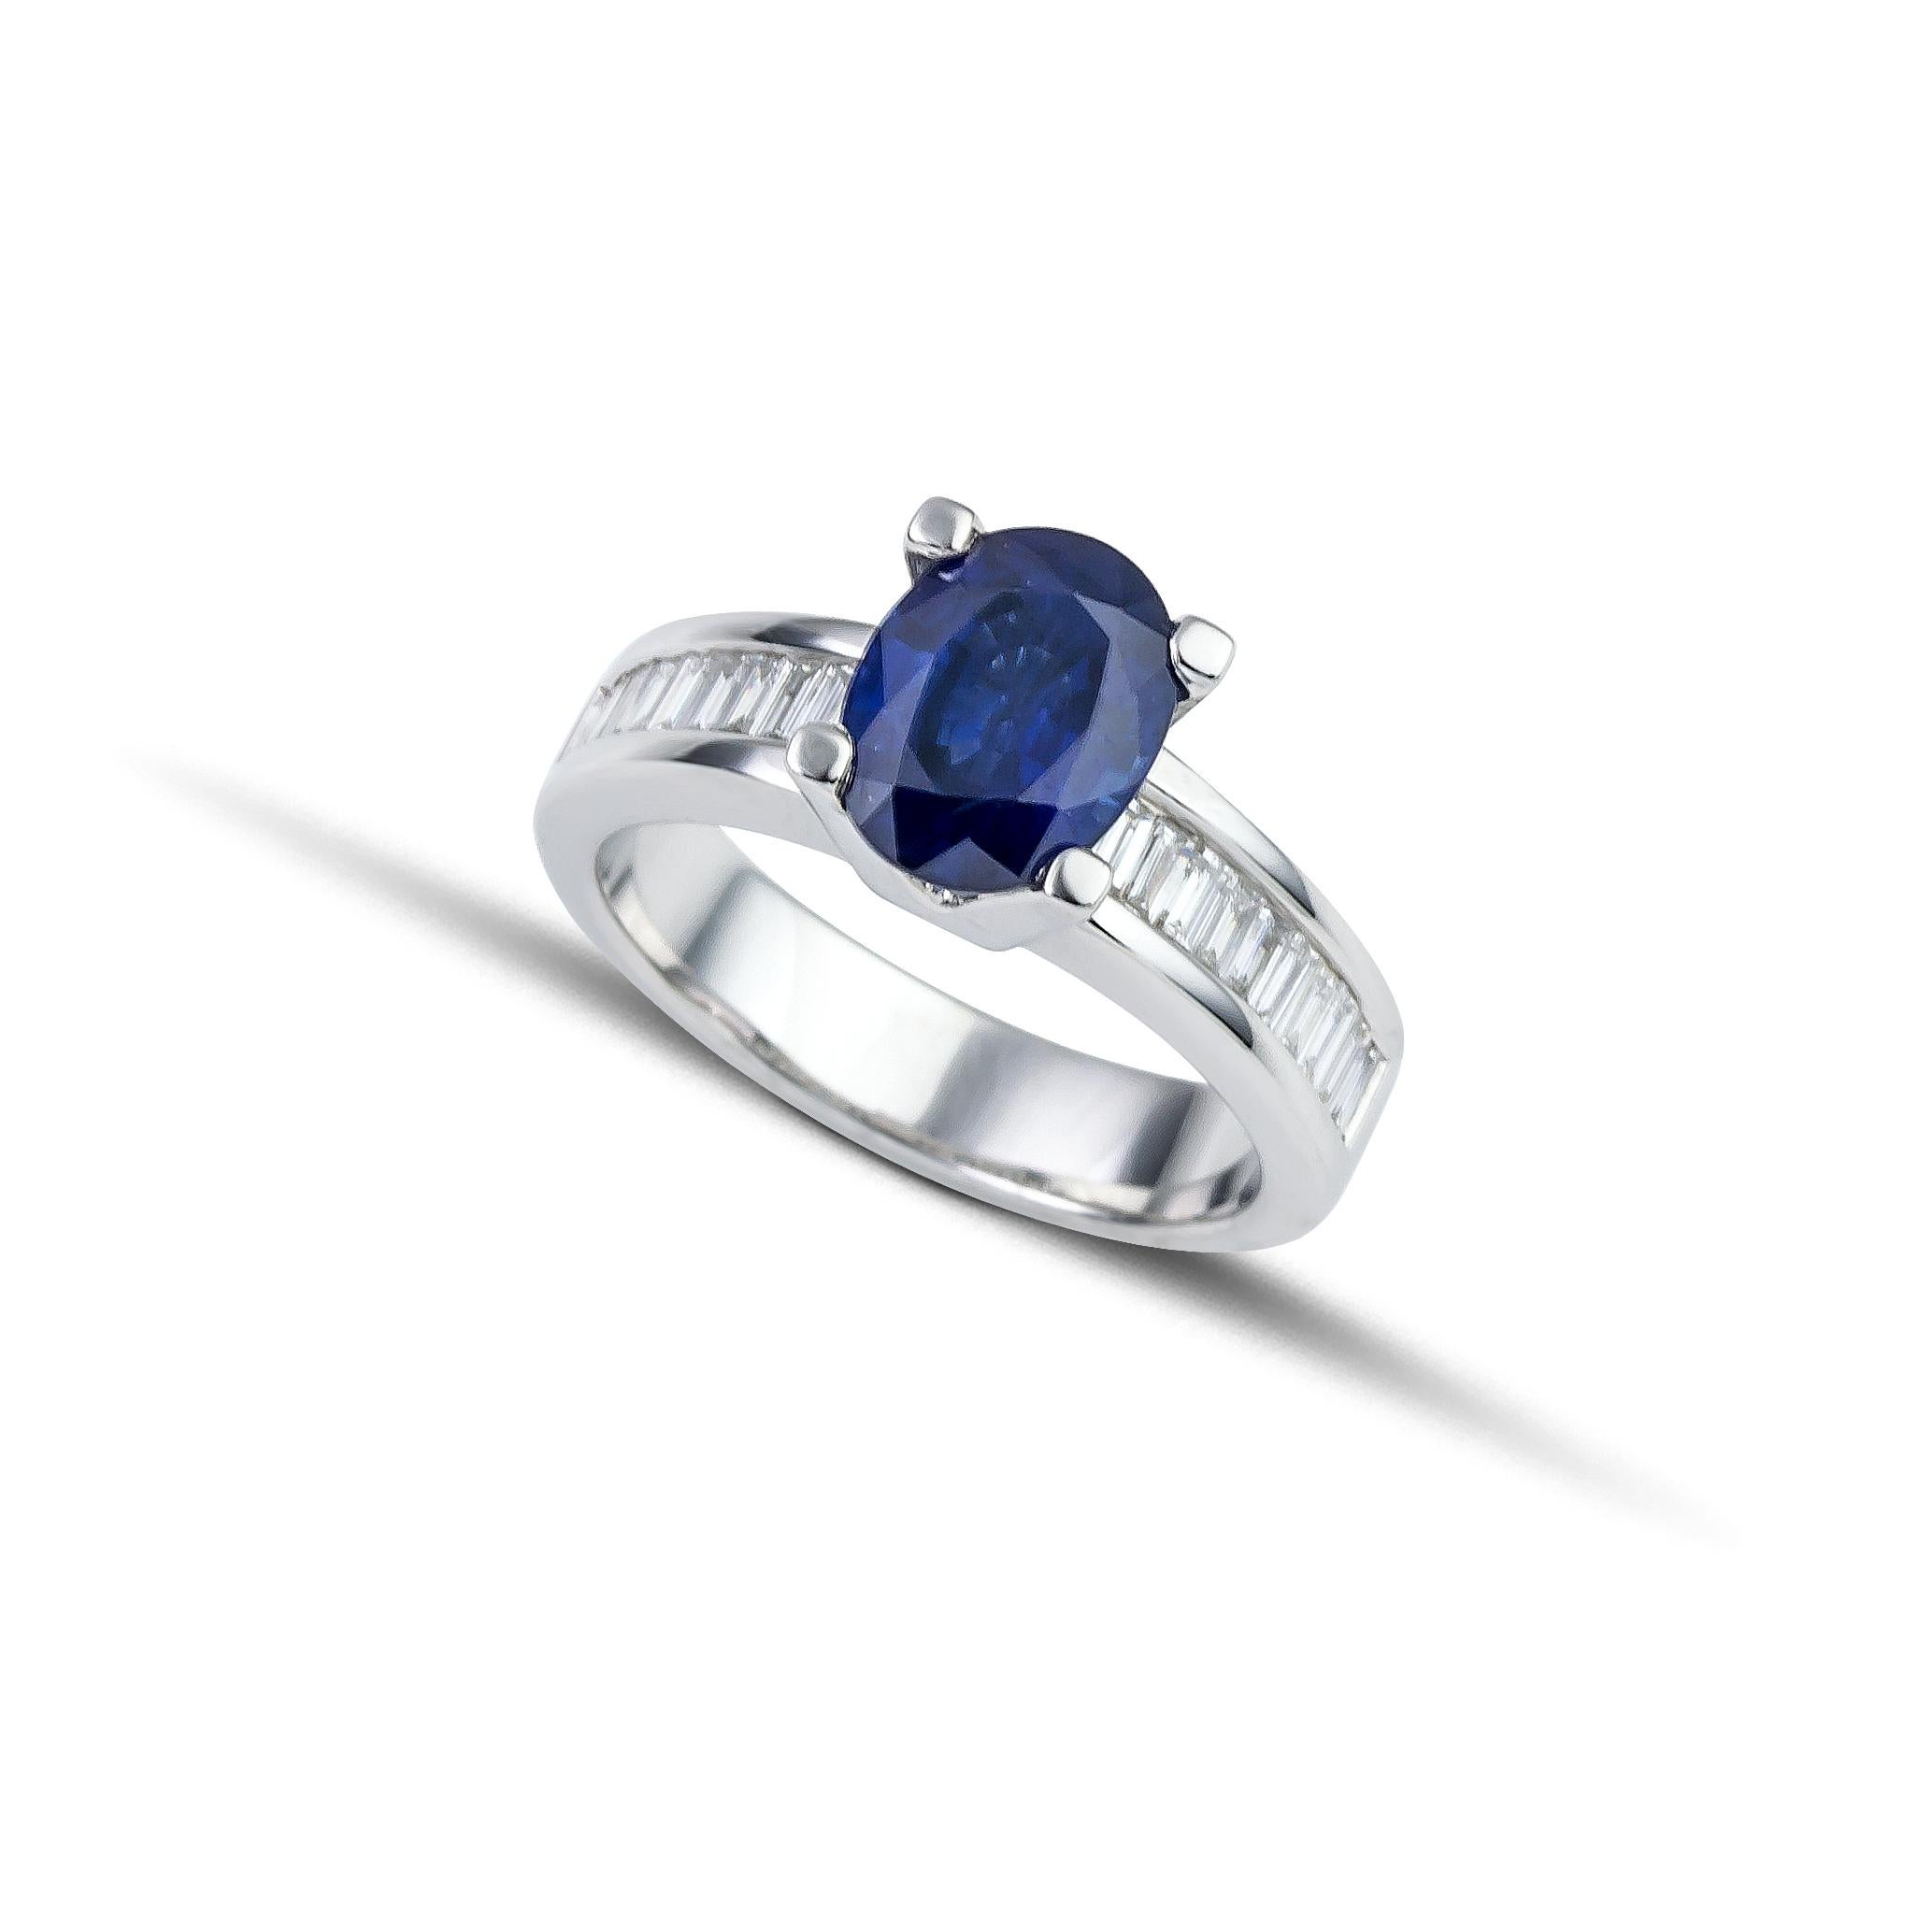 Unique solitaire ring made of 18Kt white gold and oval blue sapphire 2.90 ct and baguettes cut diamonds 0.53 ct on the shoulders. The big oval blue sapphire is set among four prongs, while the diamonds are carefully put on the shoulders of the ring.